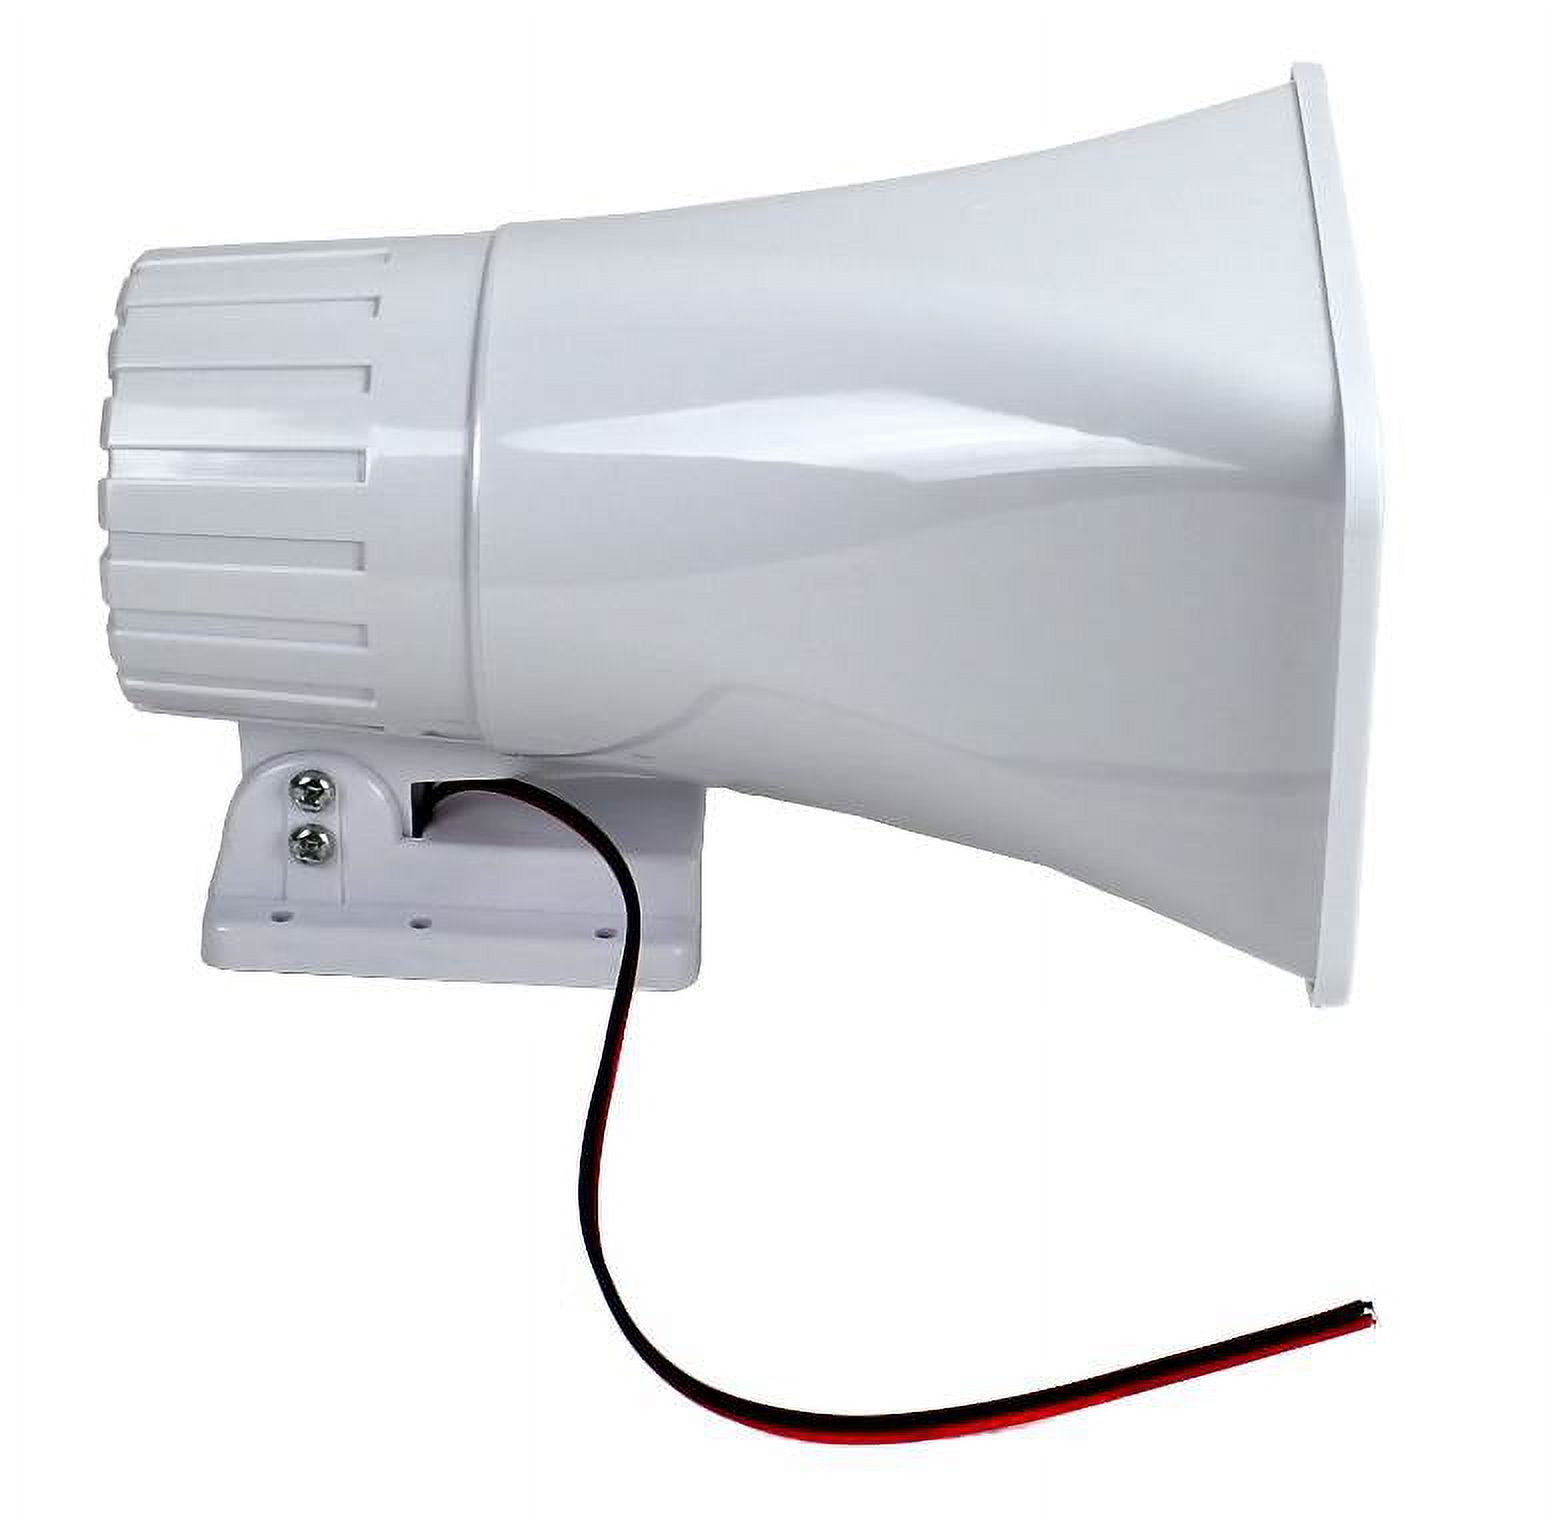 Pyle PHSP5 8" 65W 8-Ohm Indoor & Outdoor PA Horn Speaker 65 Watts, White - image 4 of 6